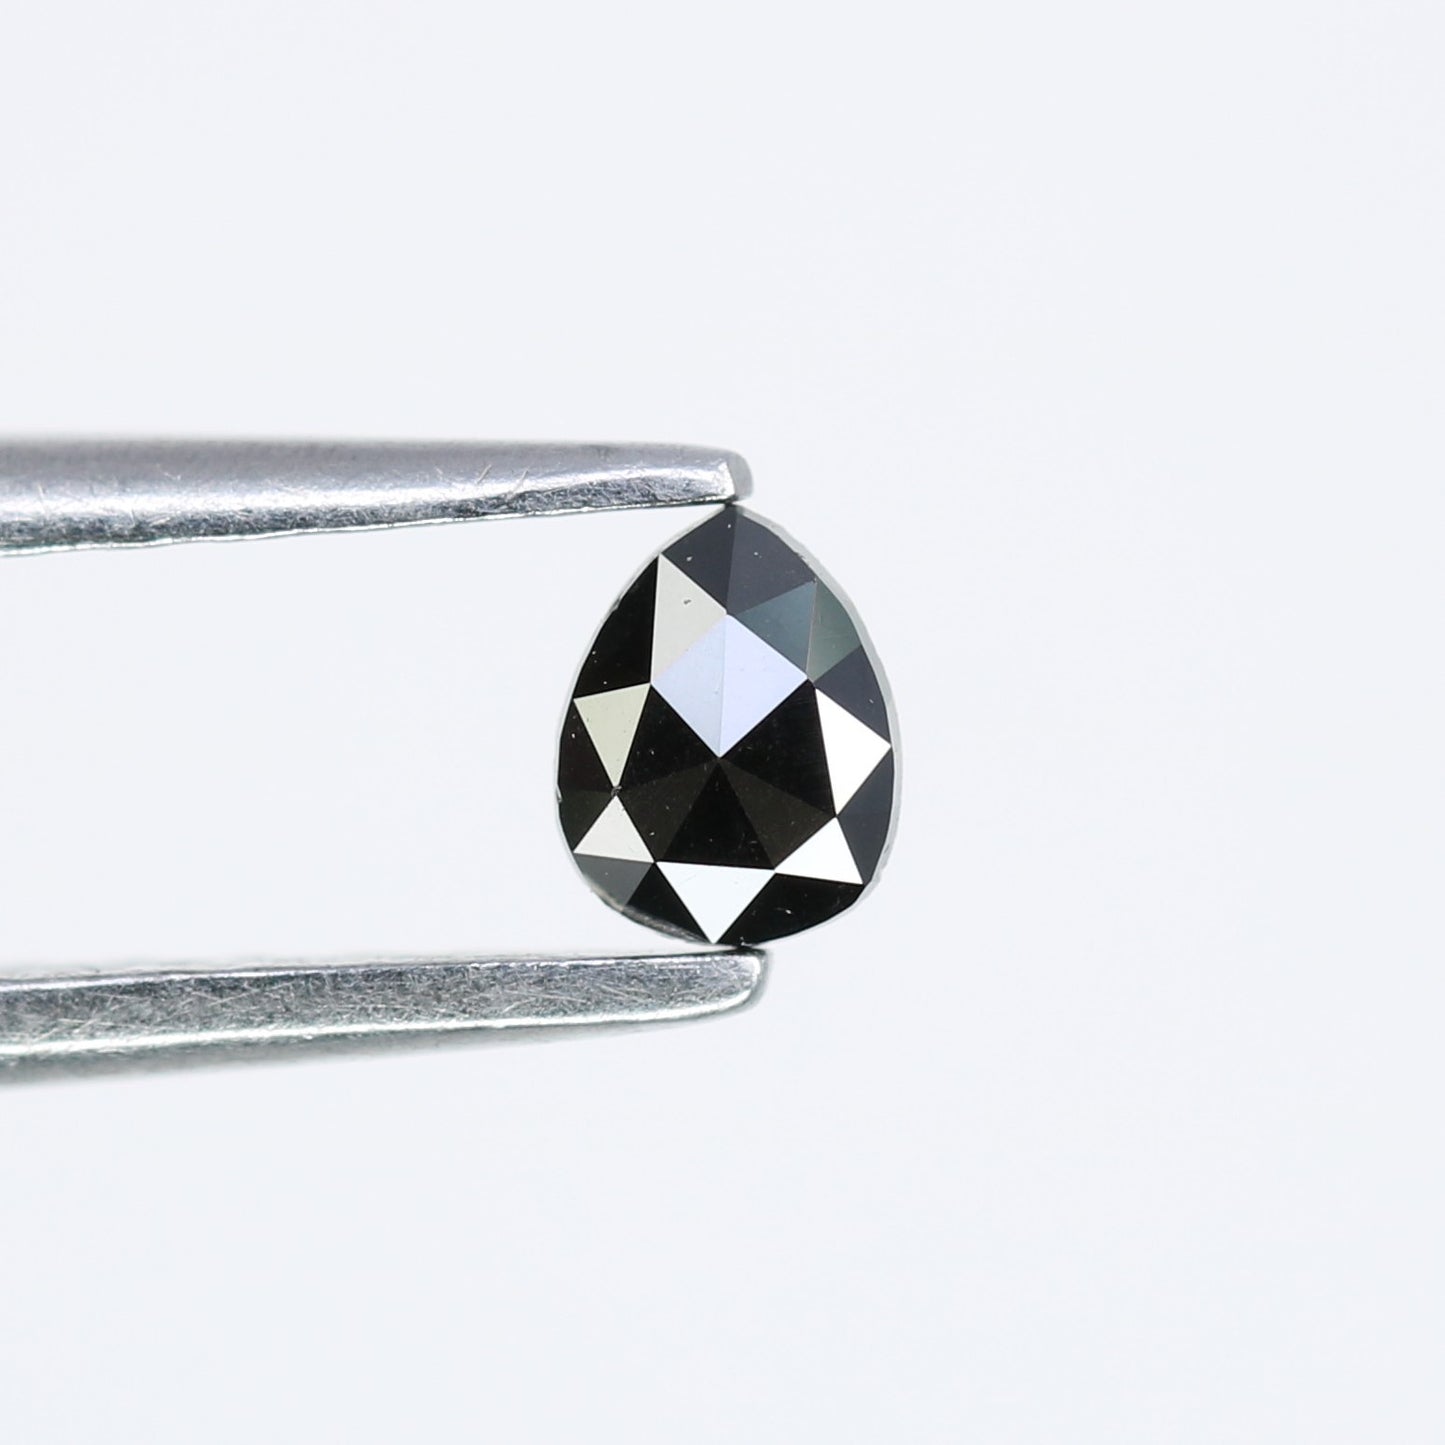 0.14 CT 4.00 x 3.10 MM Pear Shape Black Natural Diamond For Engagement Ring